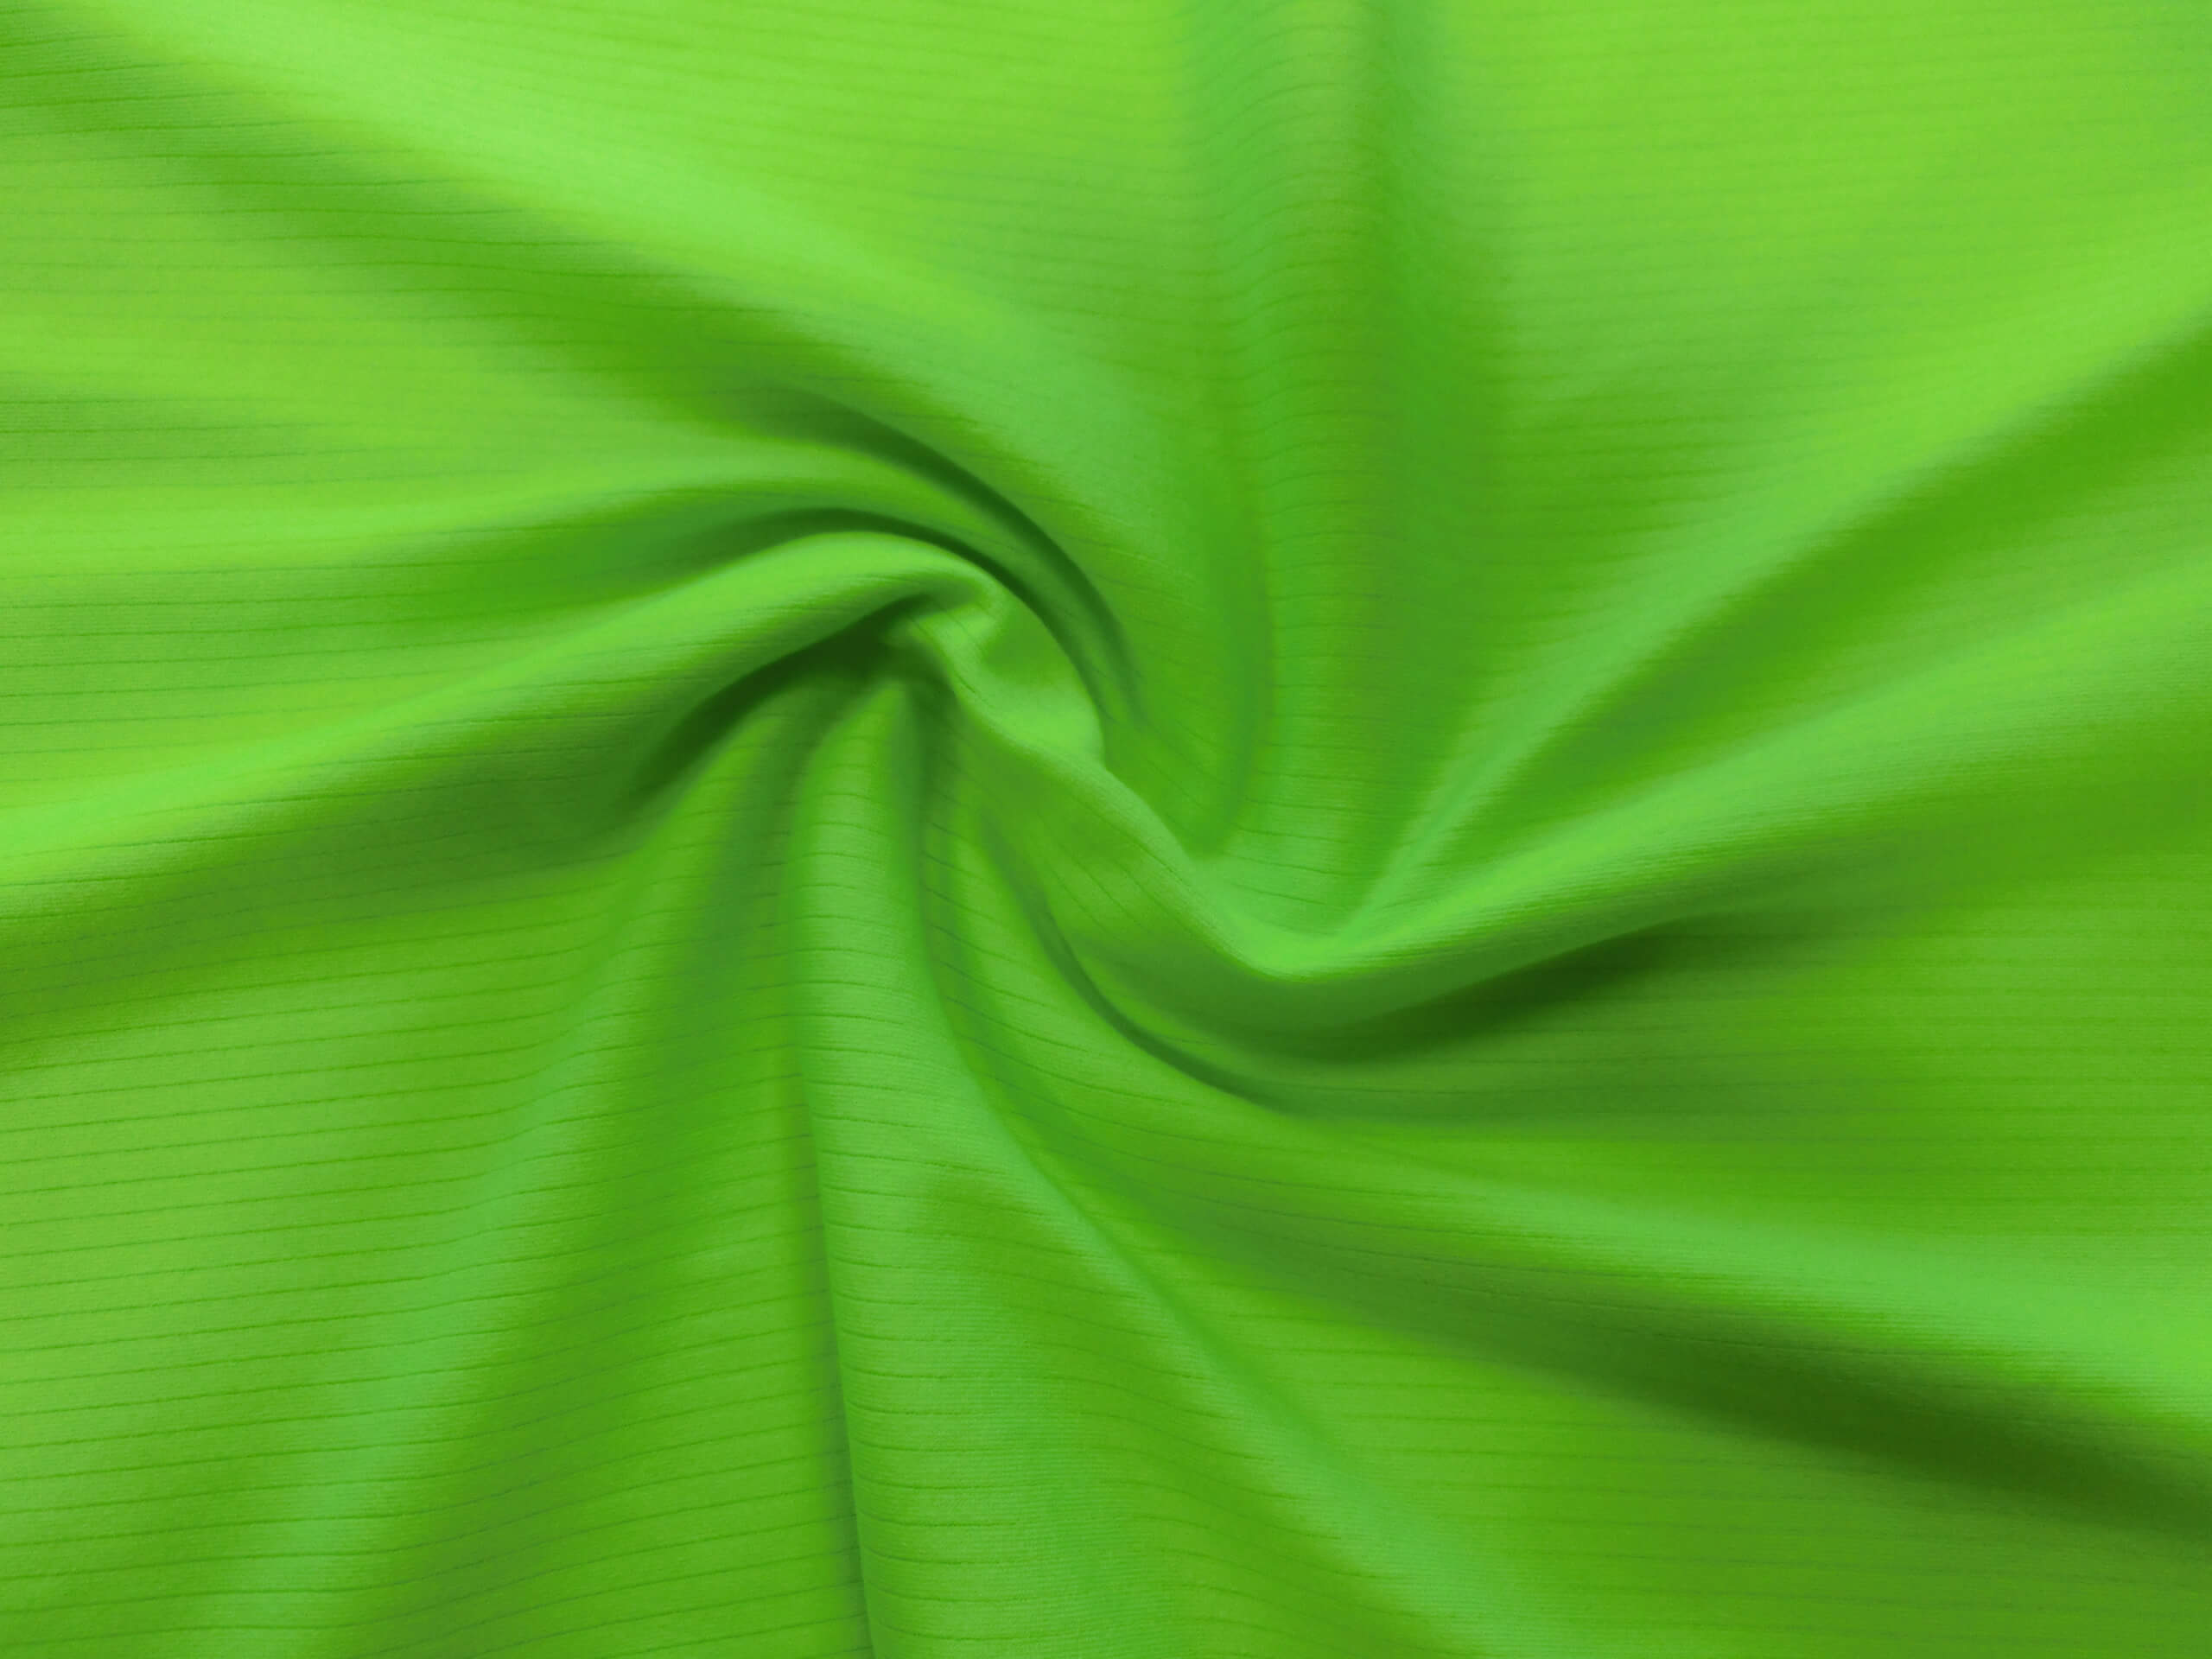 Polyester Waterproof Woven Spandex Elastic Fabric for Garment